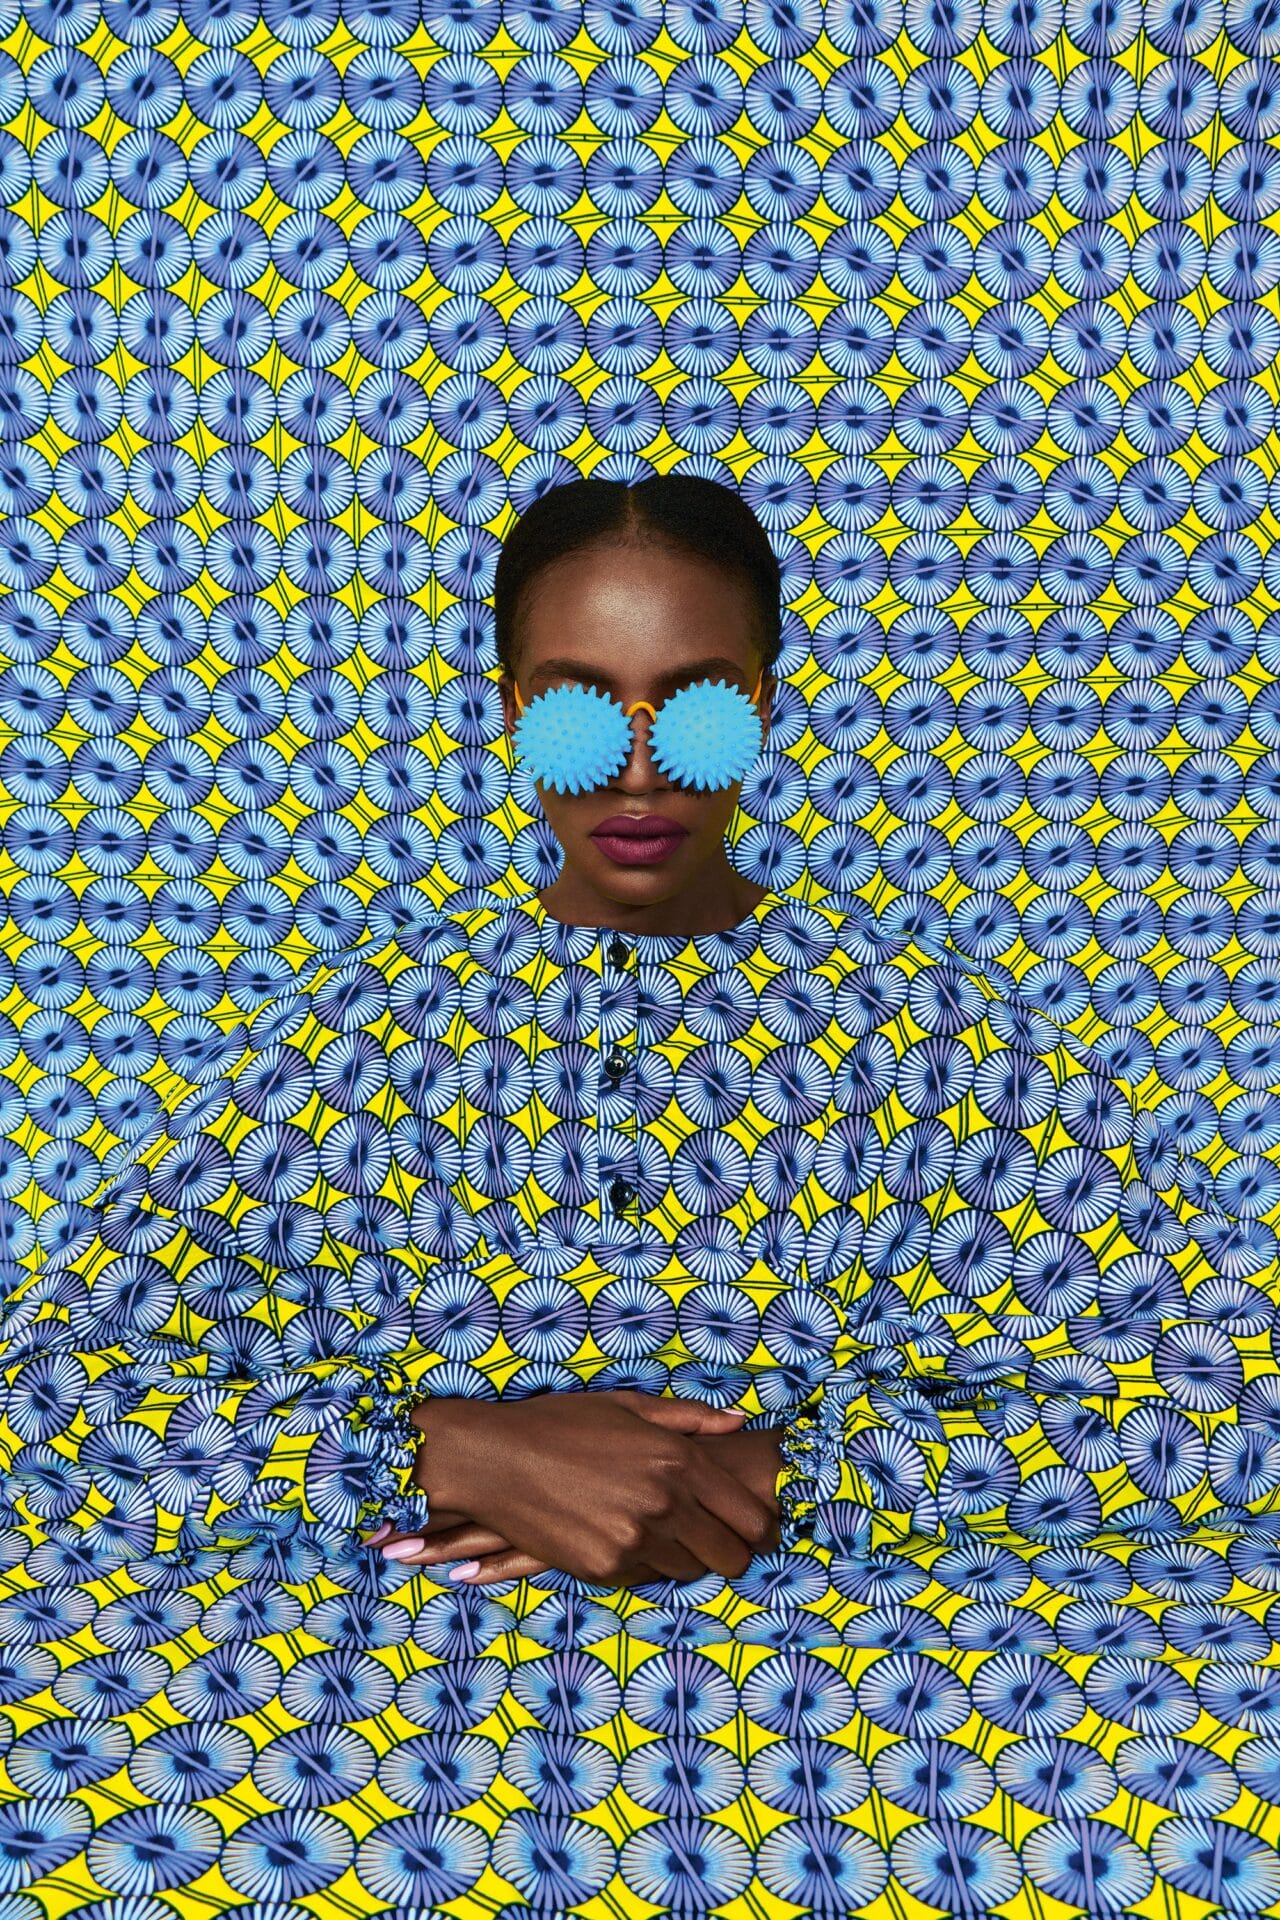 a portrait of the artist against a patterned yellow and blue backdrop. she's wearing light blue eyewear